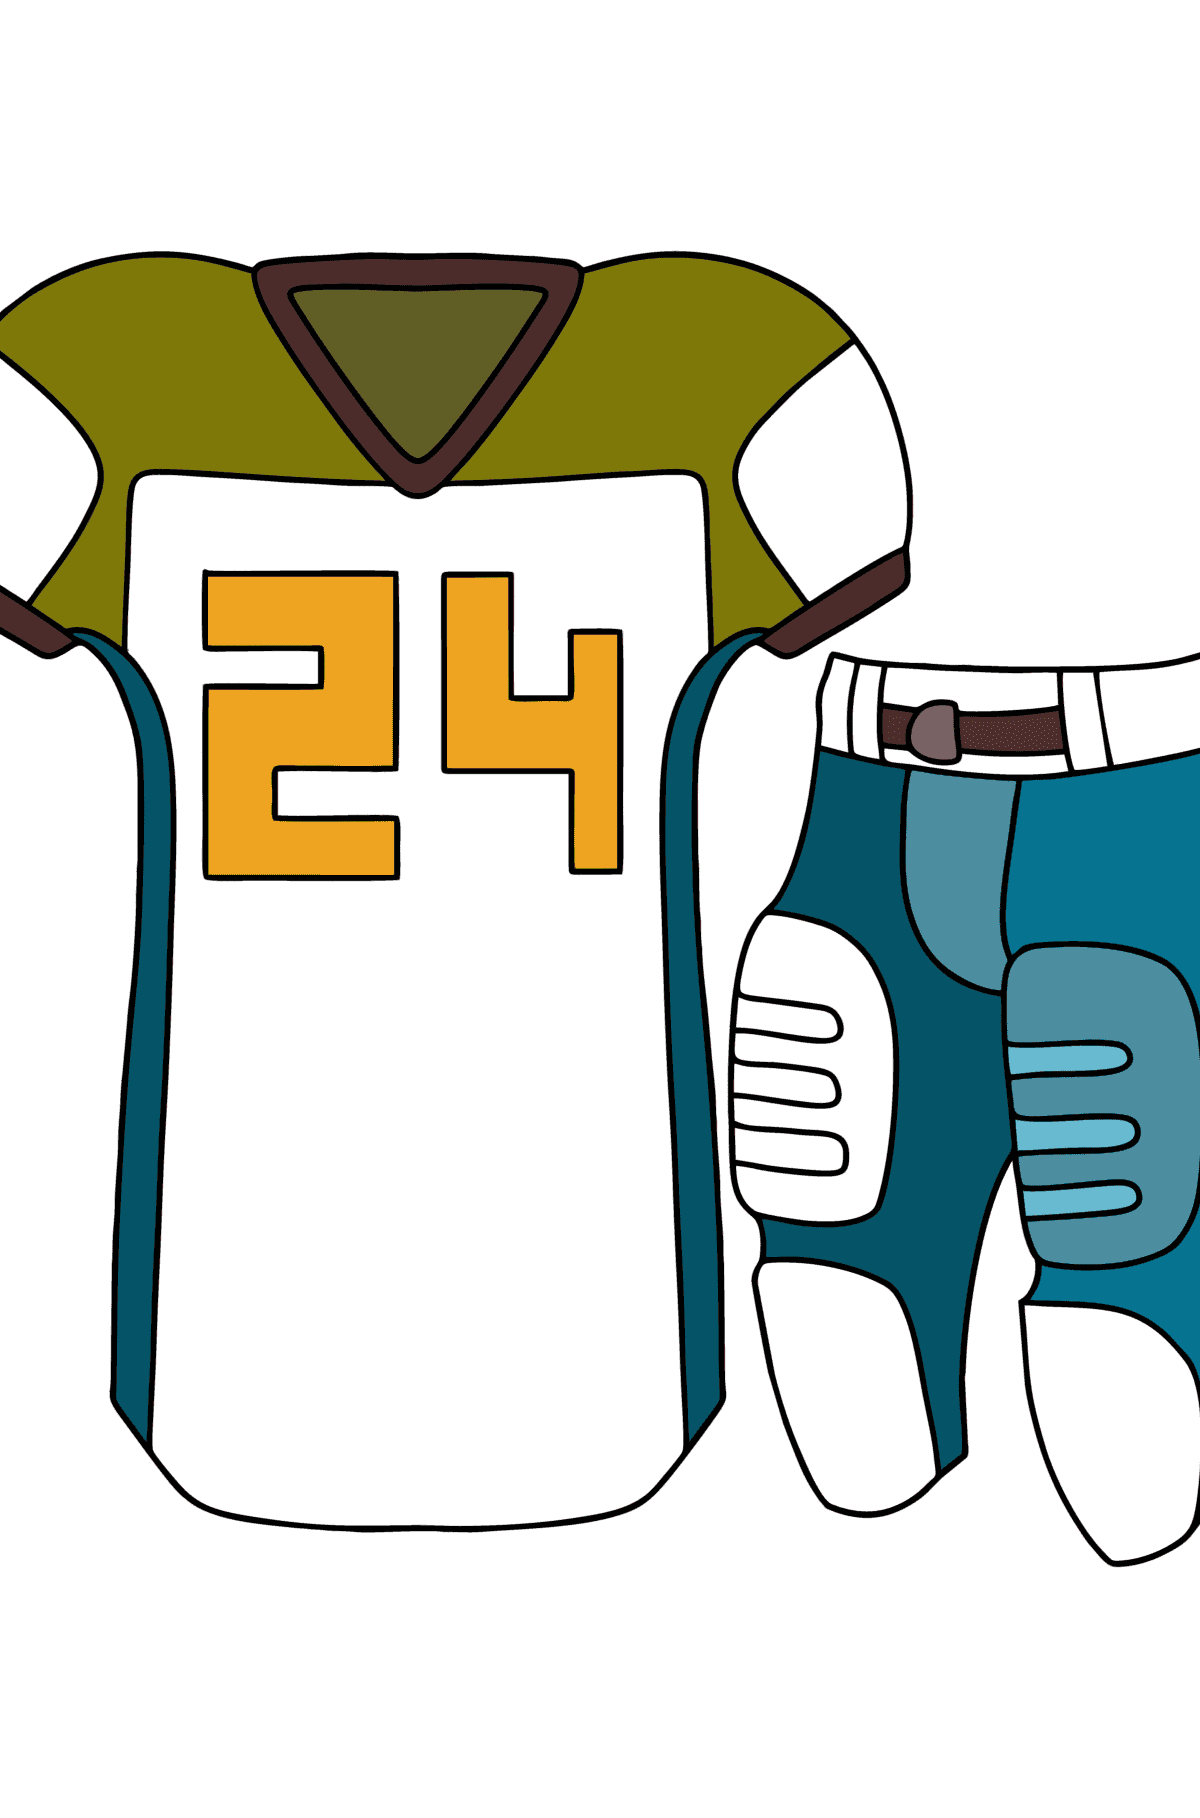 NFL Football Player Outfit сoloring page - Coloring Pages for Kids